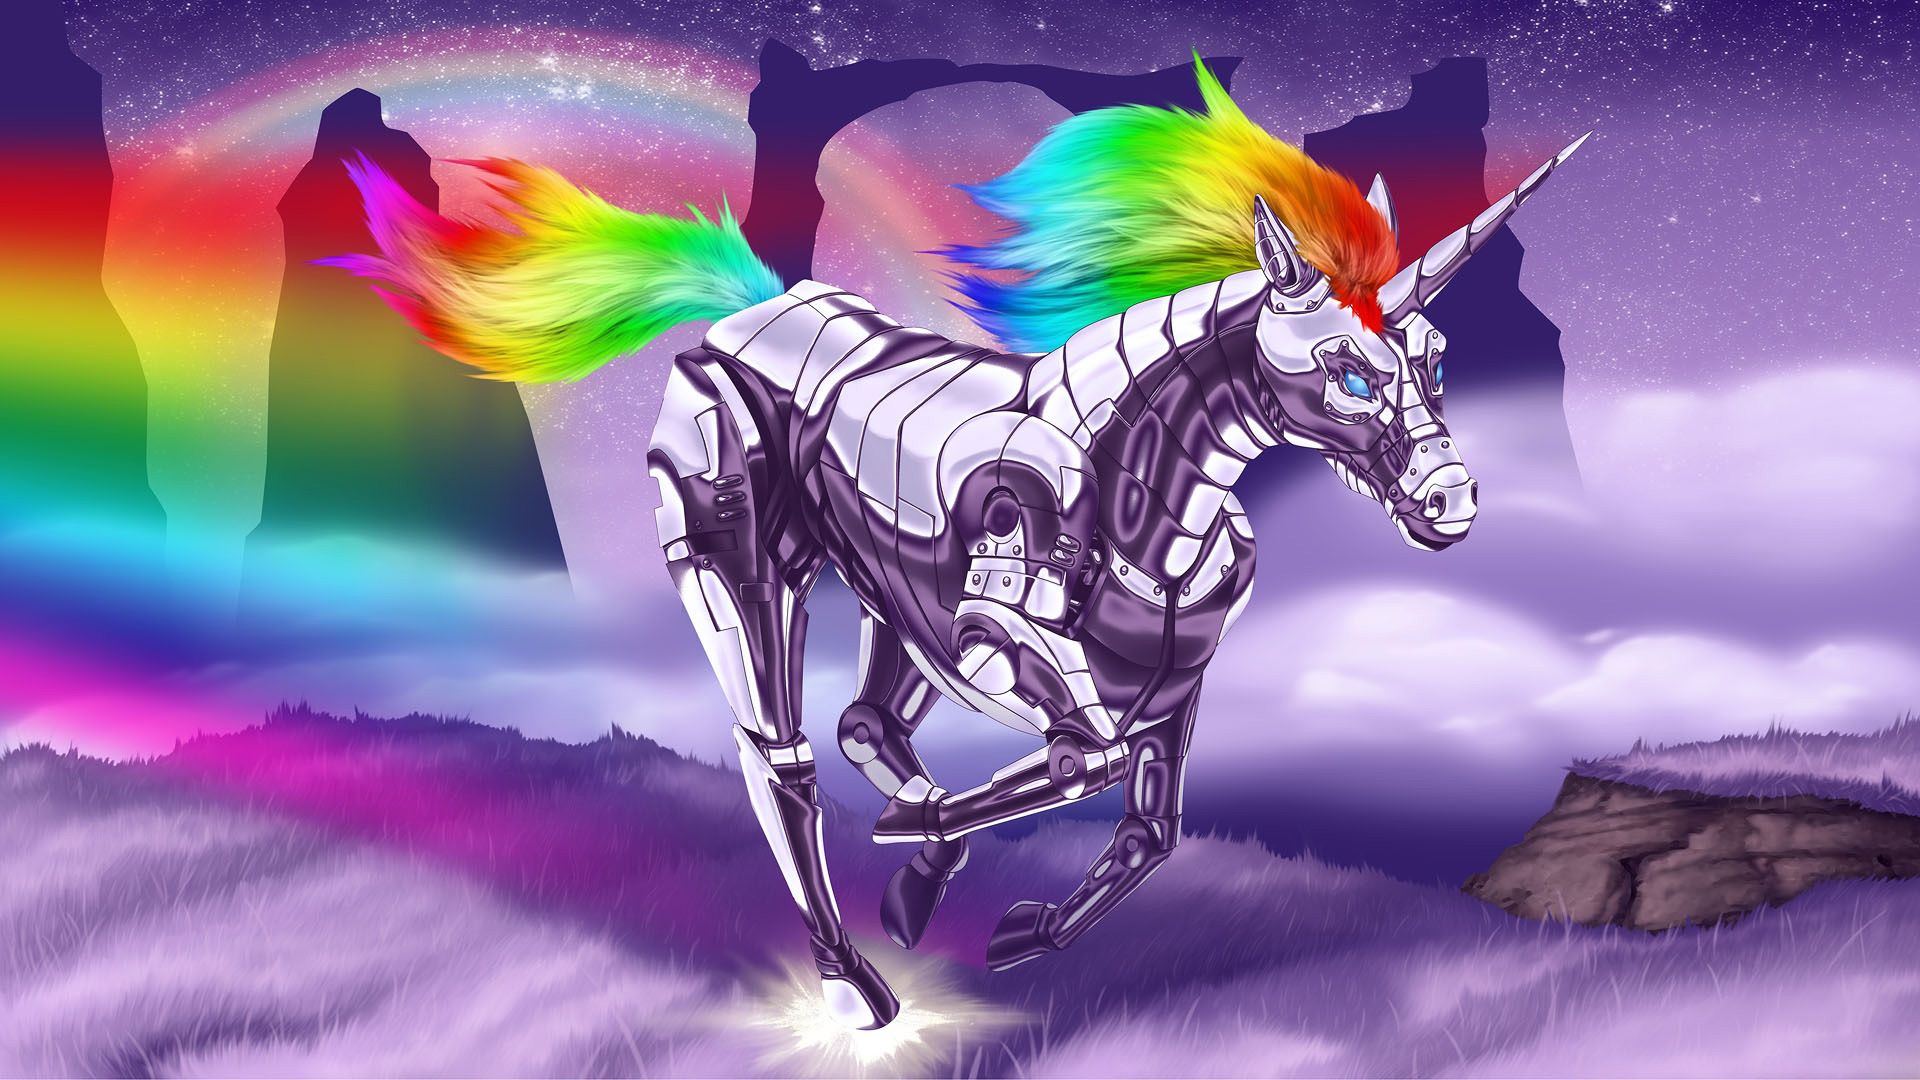 Funny Unicorn Wallpaper Full HD Free Download [29 pictures] - Anime Wallpaper